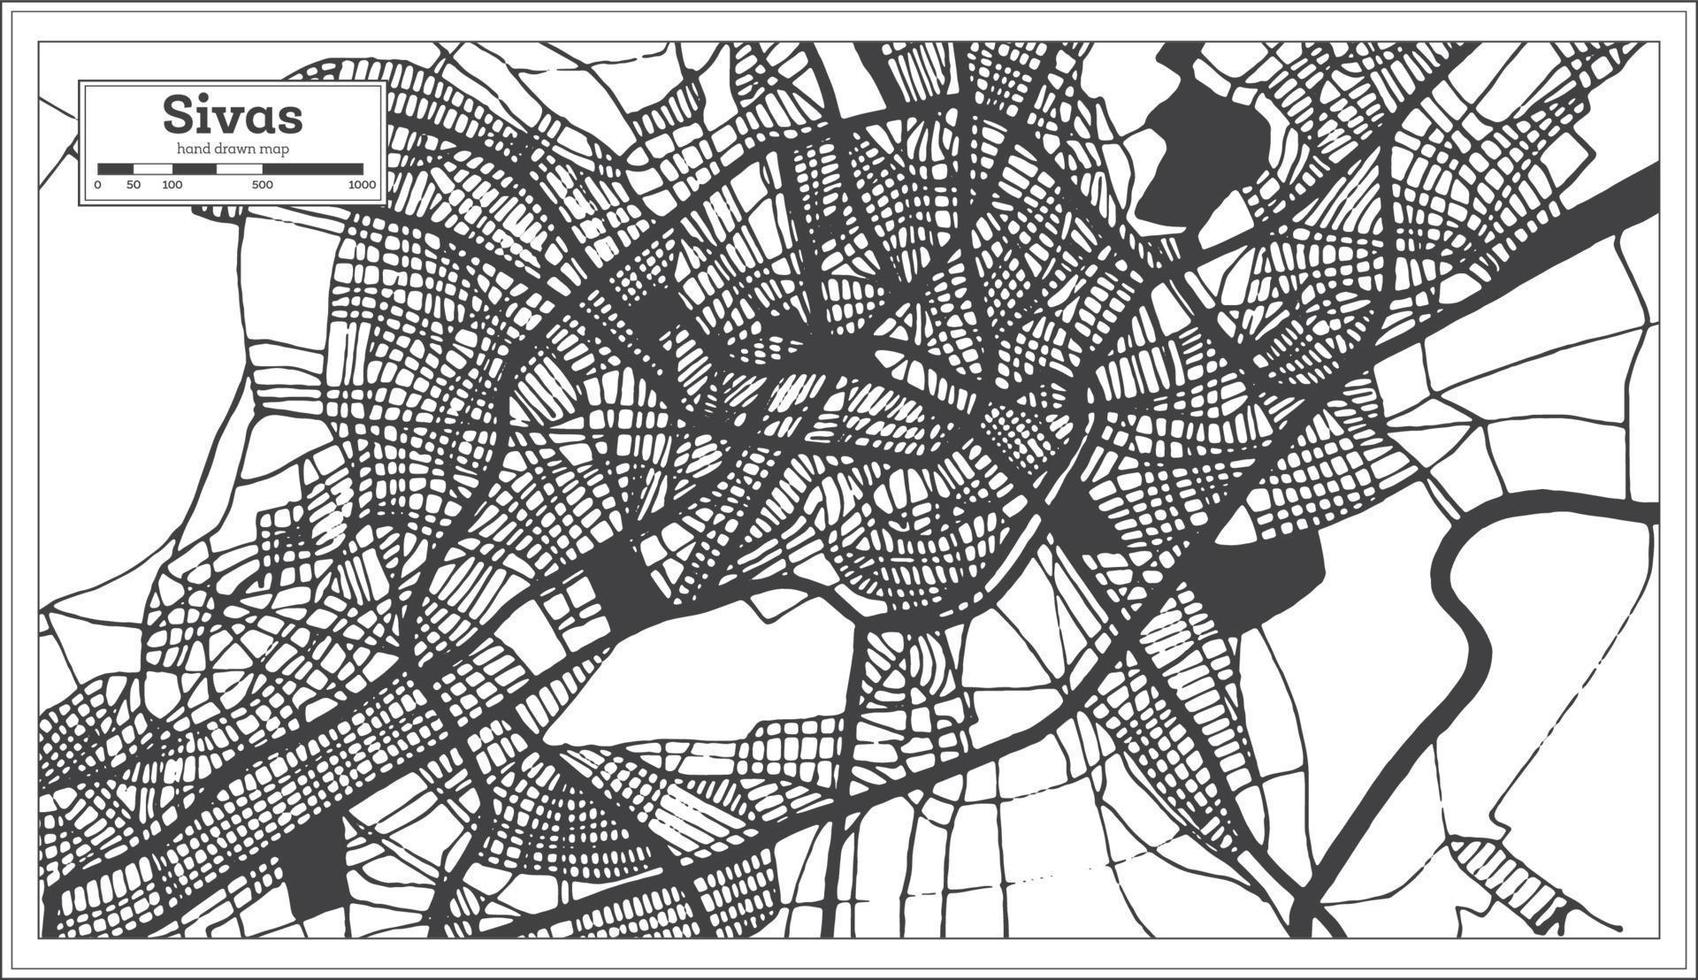 Sivas Turkey City Map in Black and White Color in Retro Style. Outline Map. vector